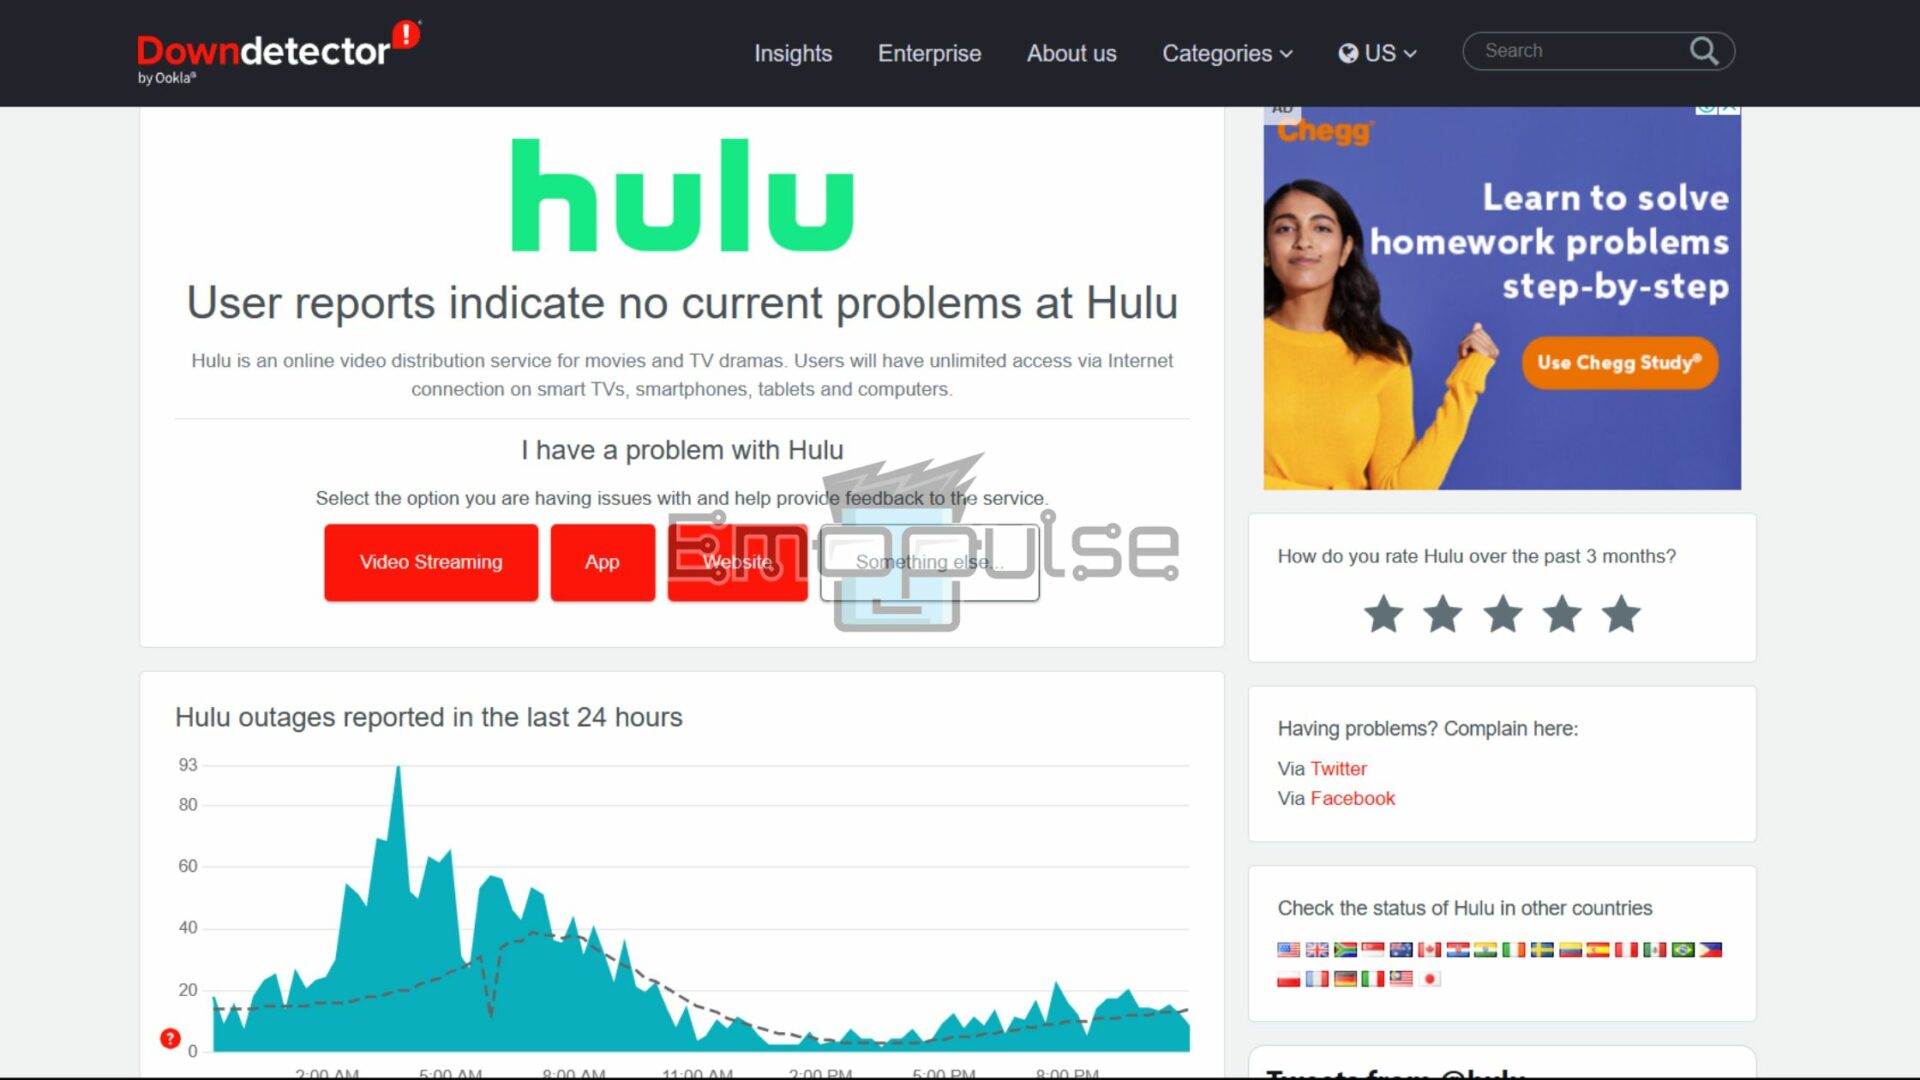 Down Detector web page showing outages in Hulu service in last 24 hours hulu error code p-dev340